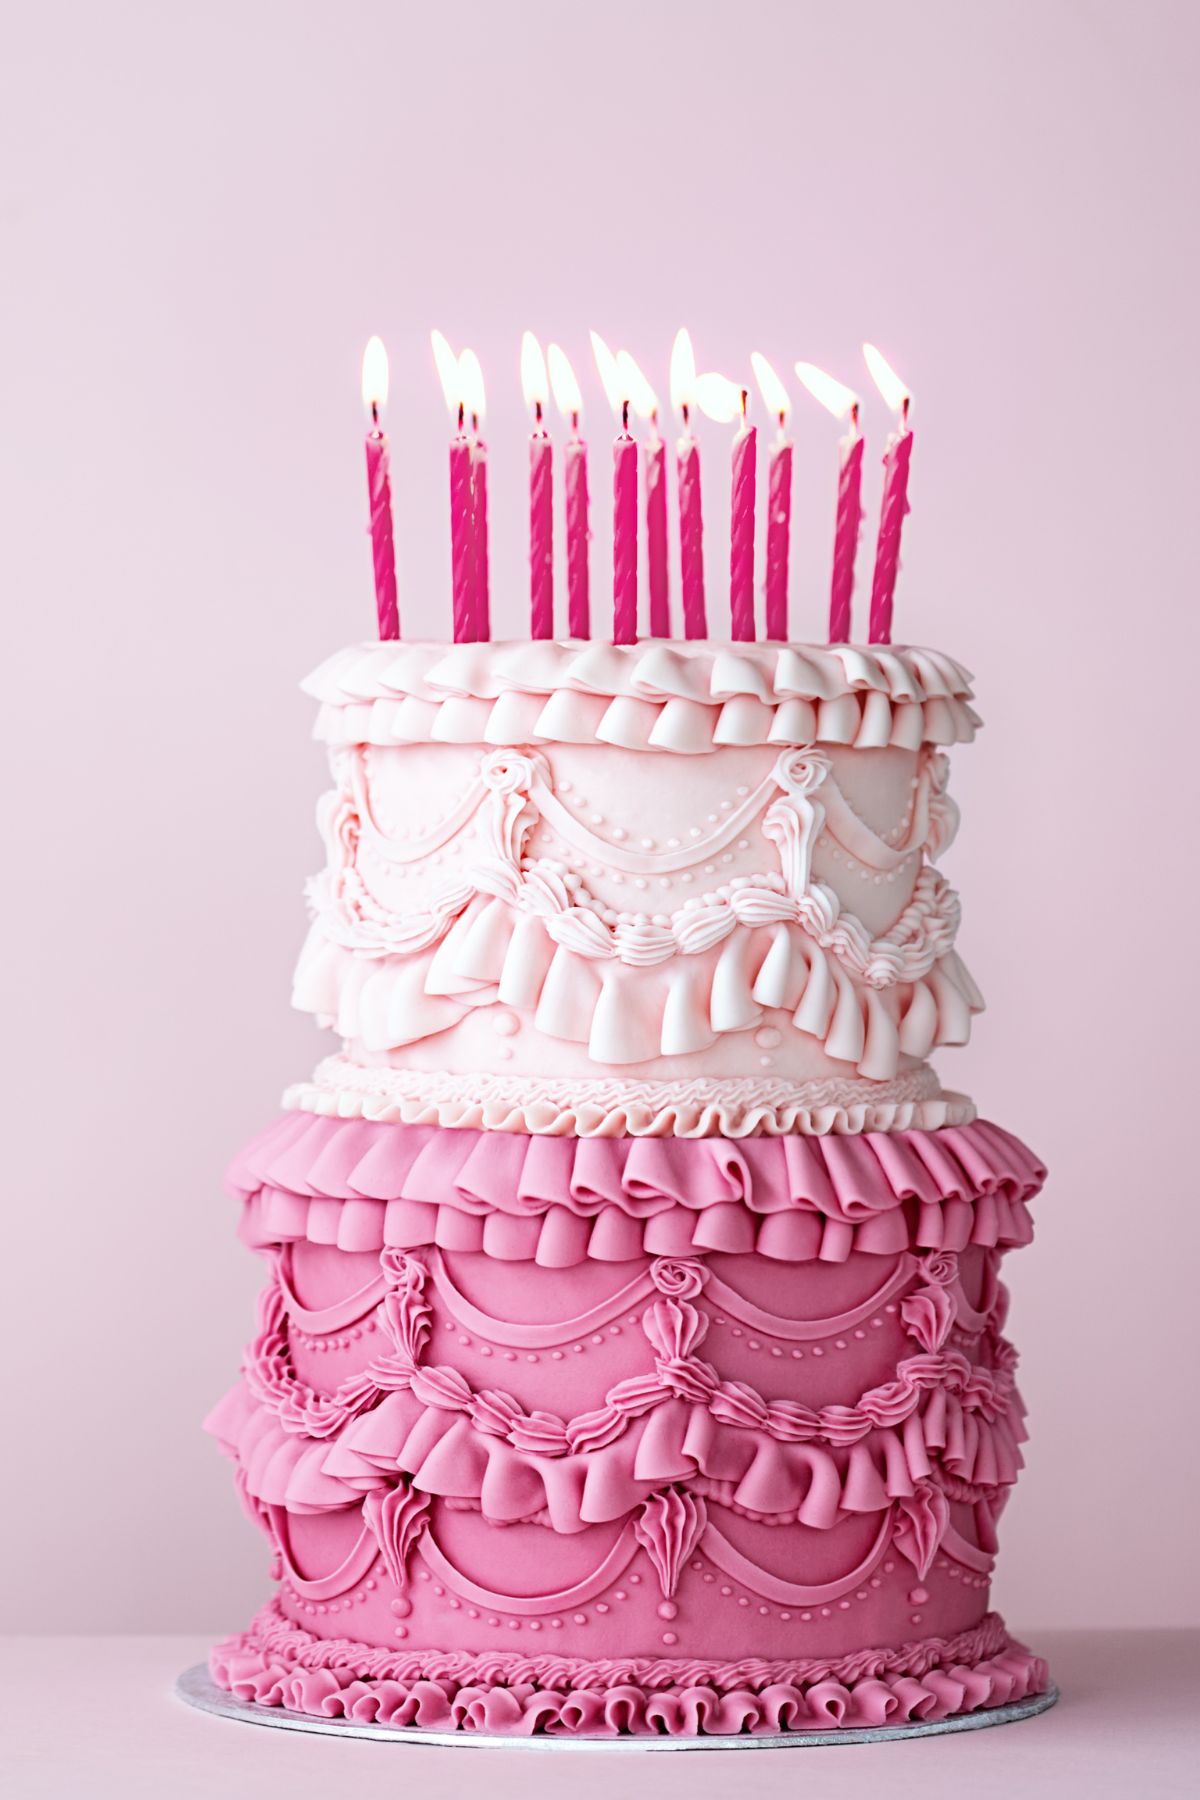 two tiered pink decorated cake with pink candles